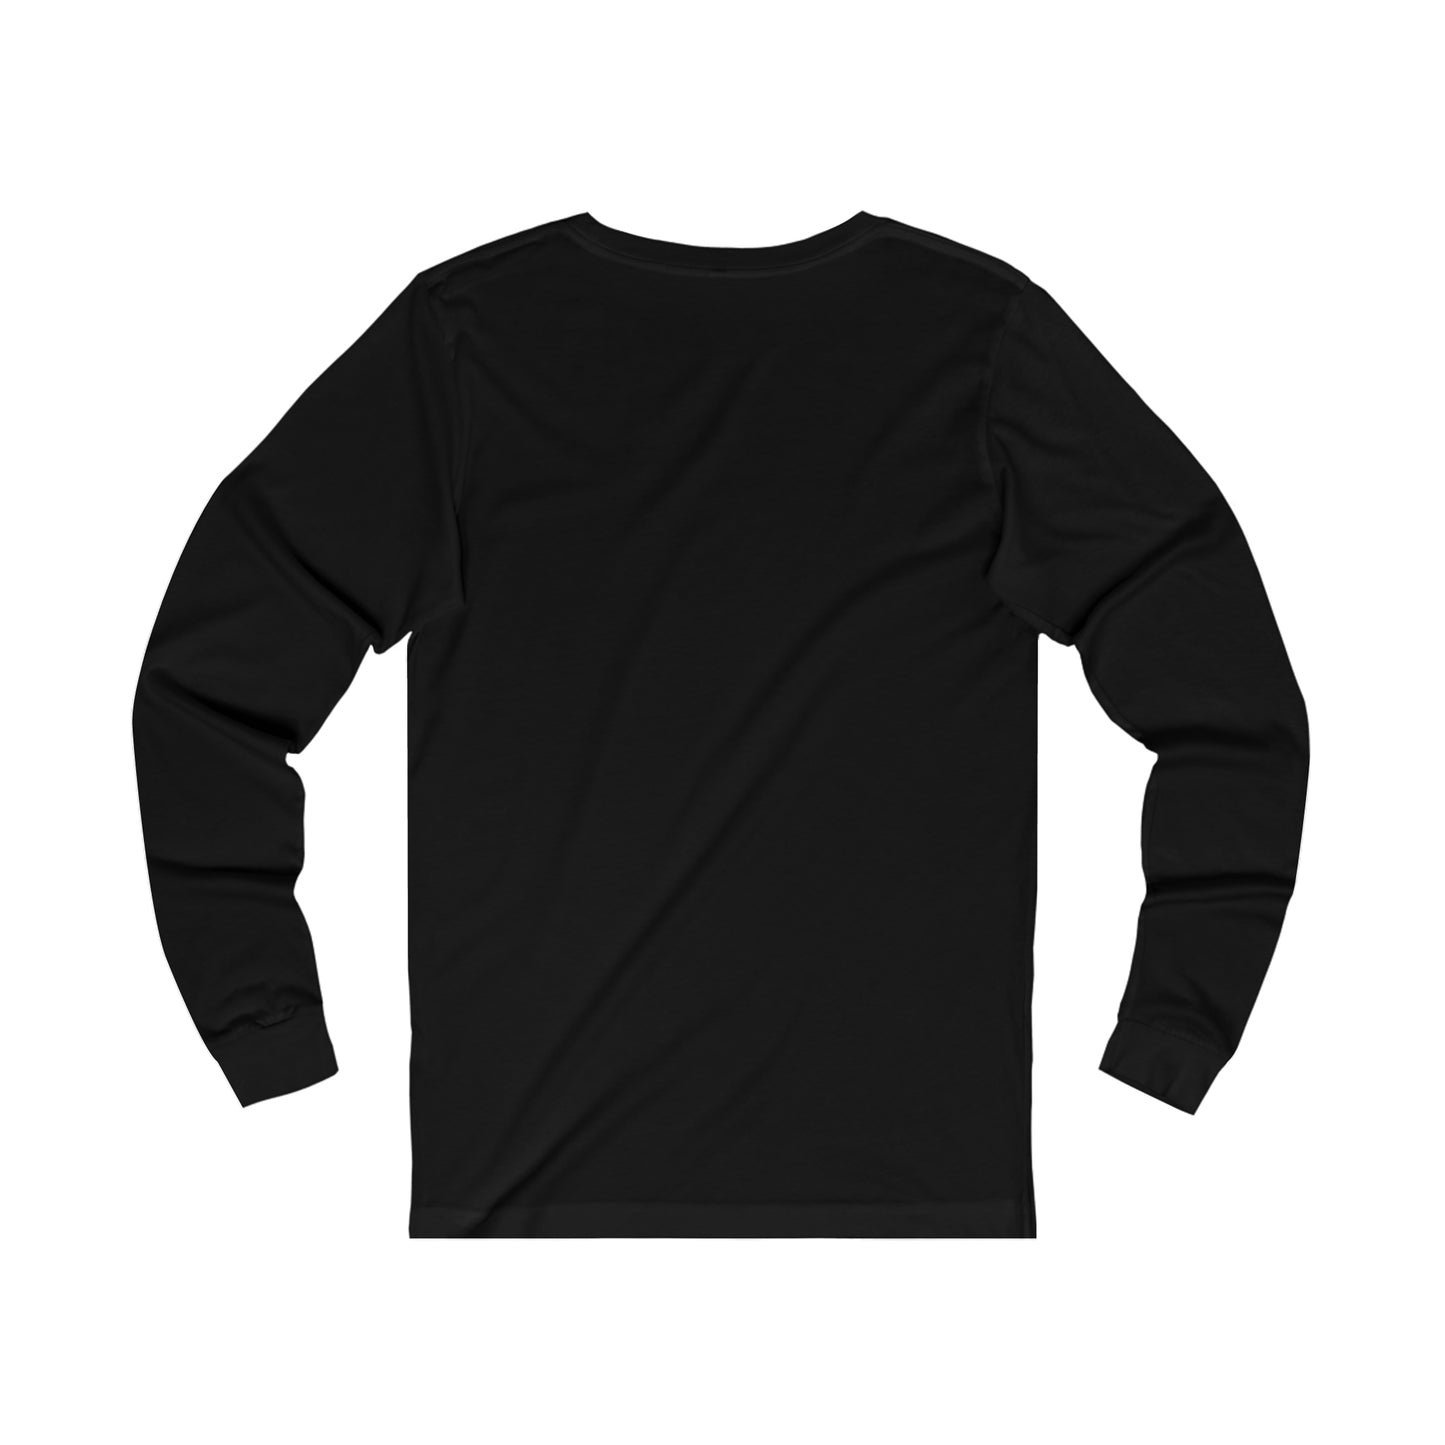 Ethical Equestrian Long Sleeve Tee